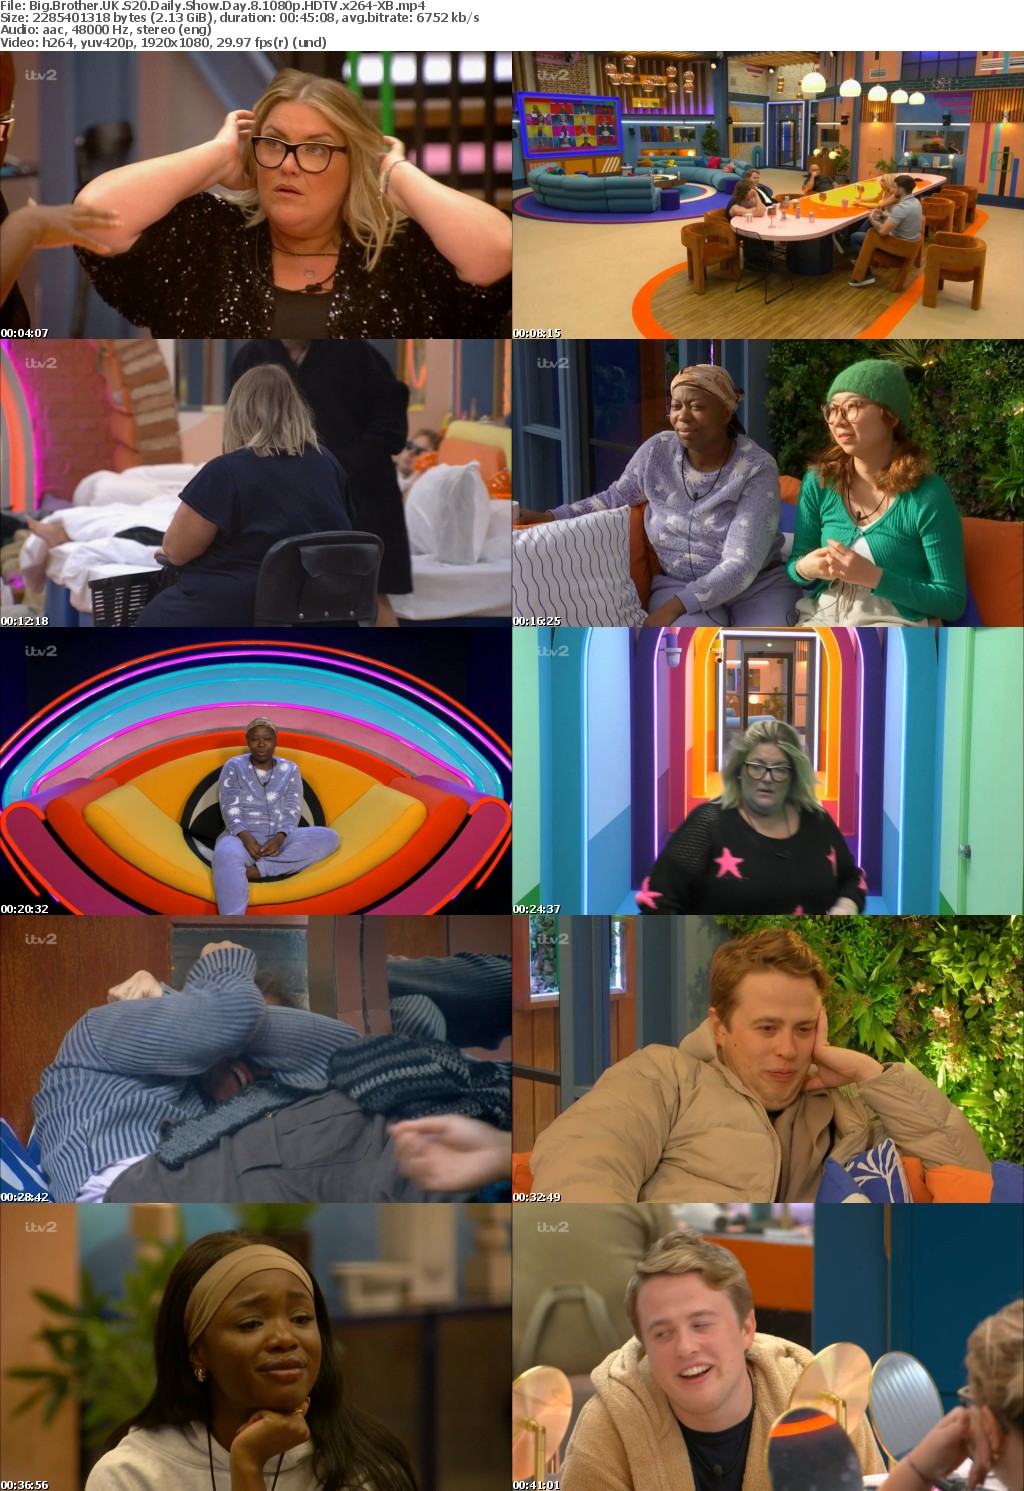 Big Brother UK S20 Daily Show Day 8 1080p HDTV x264-XB